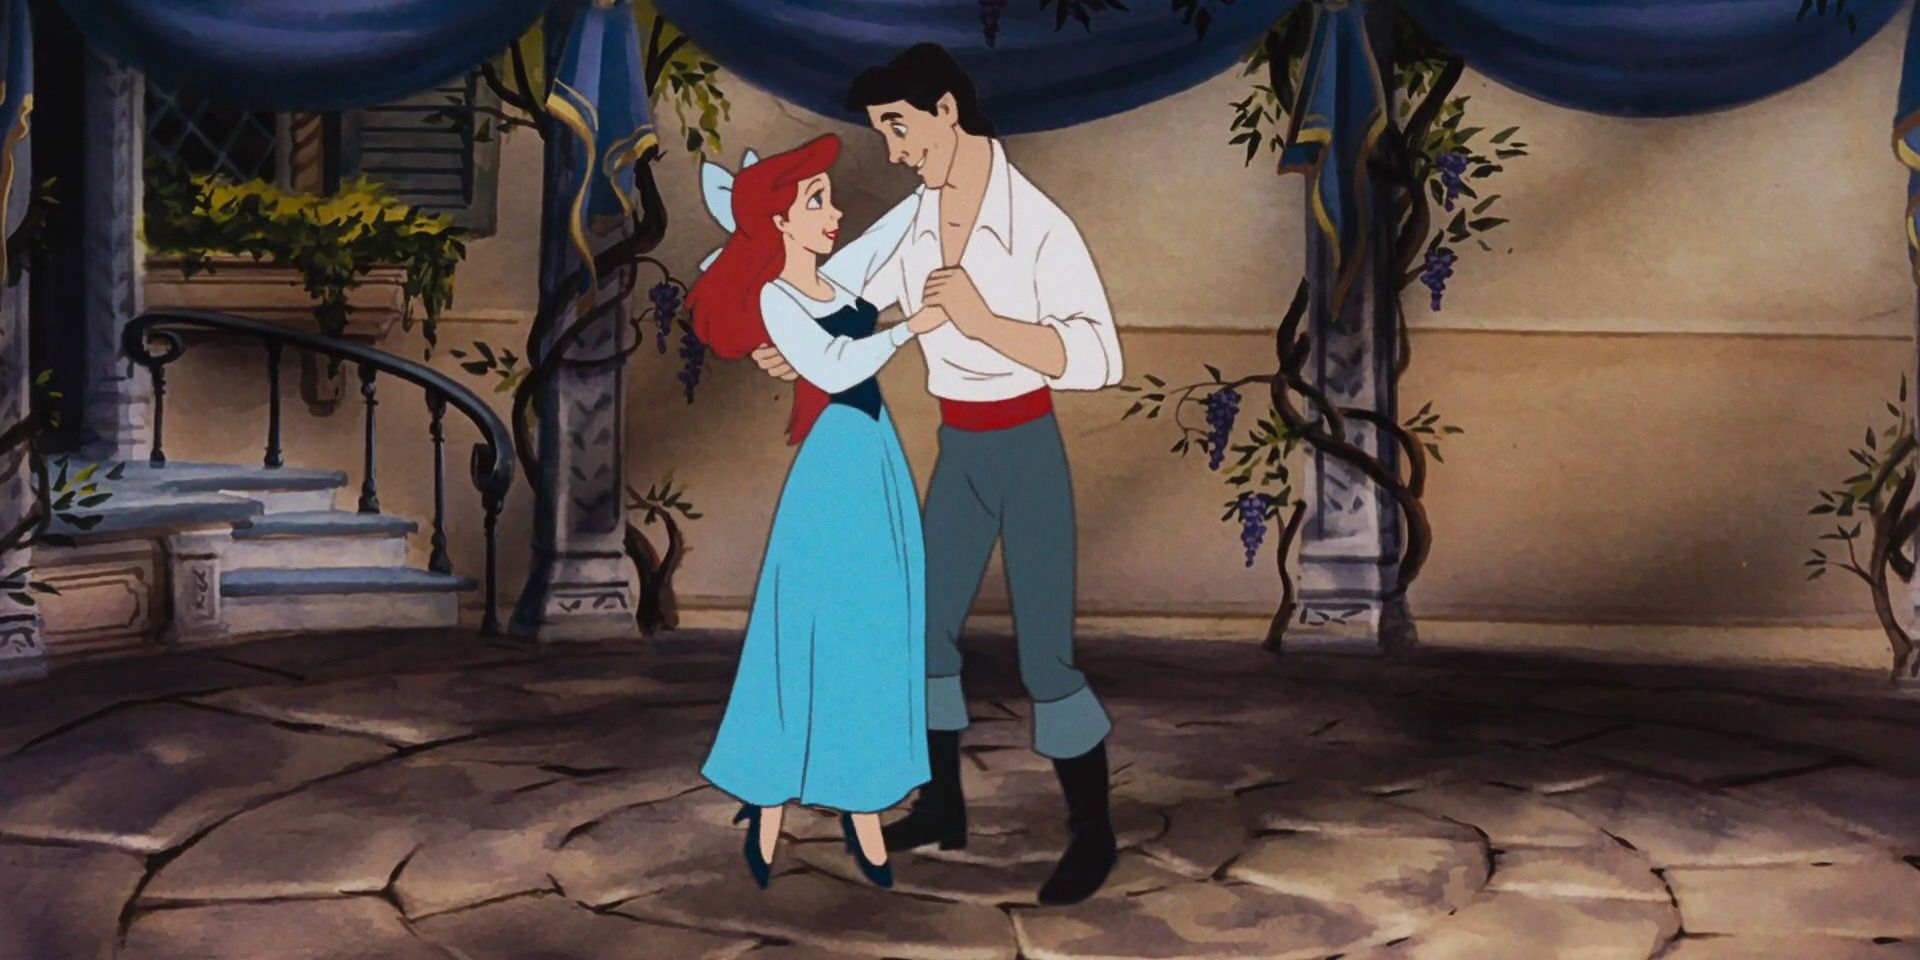 Prince Eric and Ariel dance in The Little Mermaid